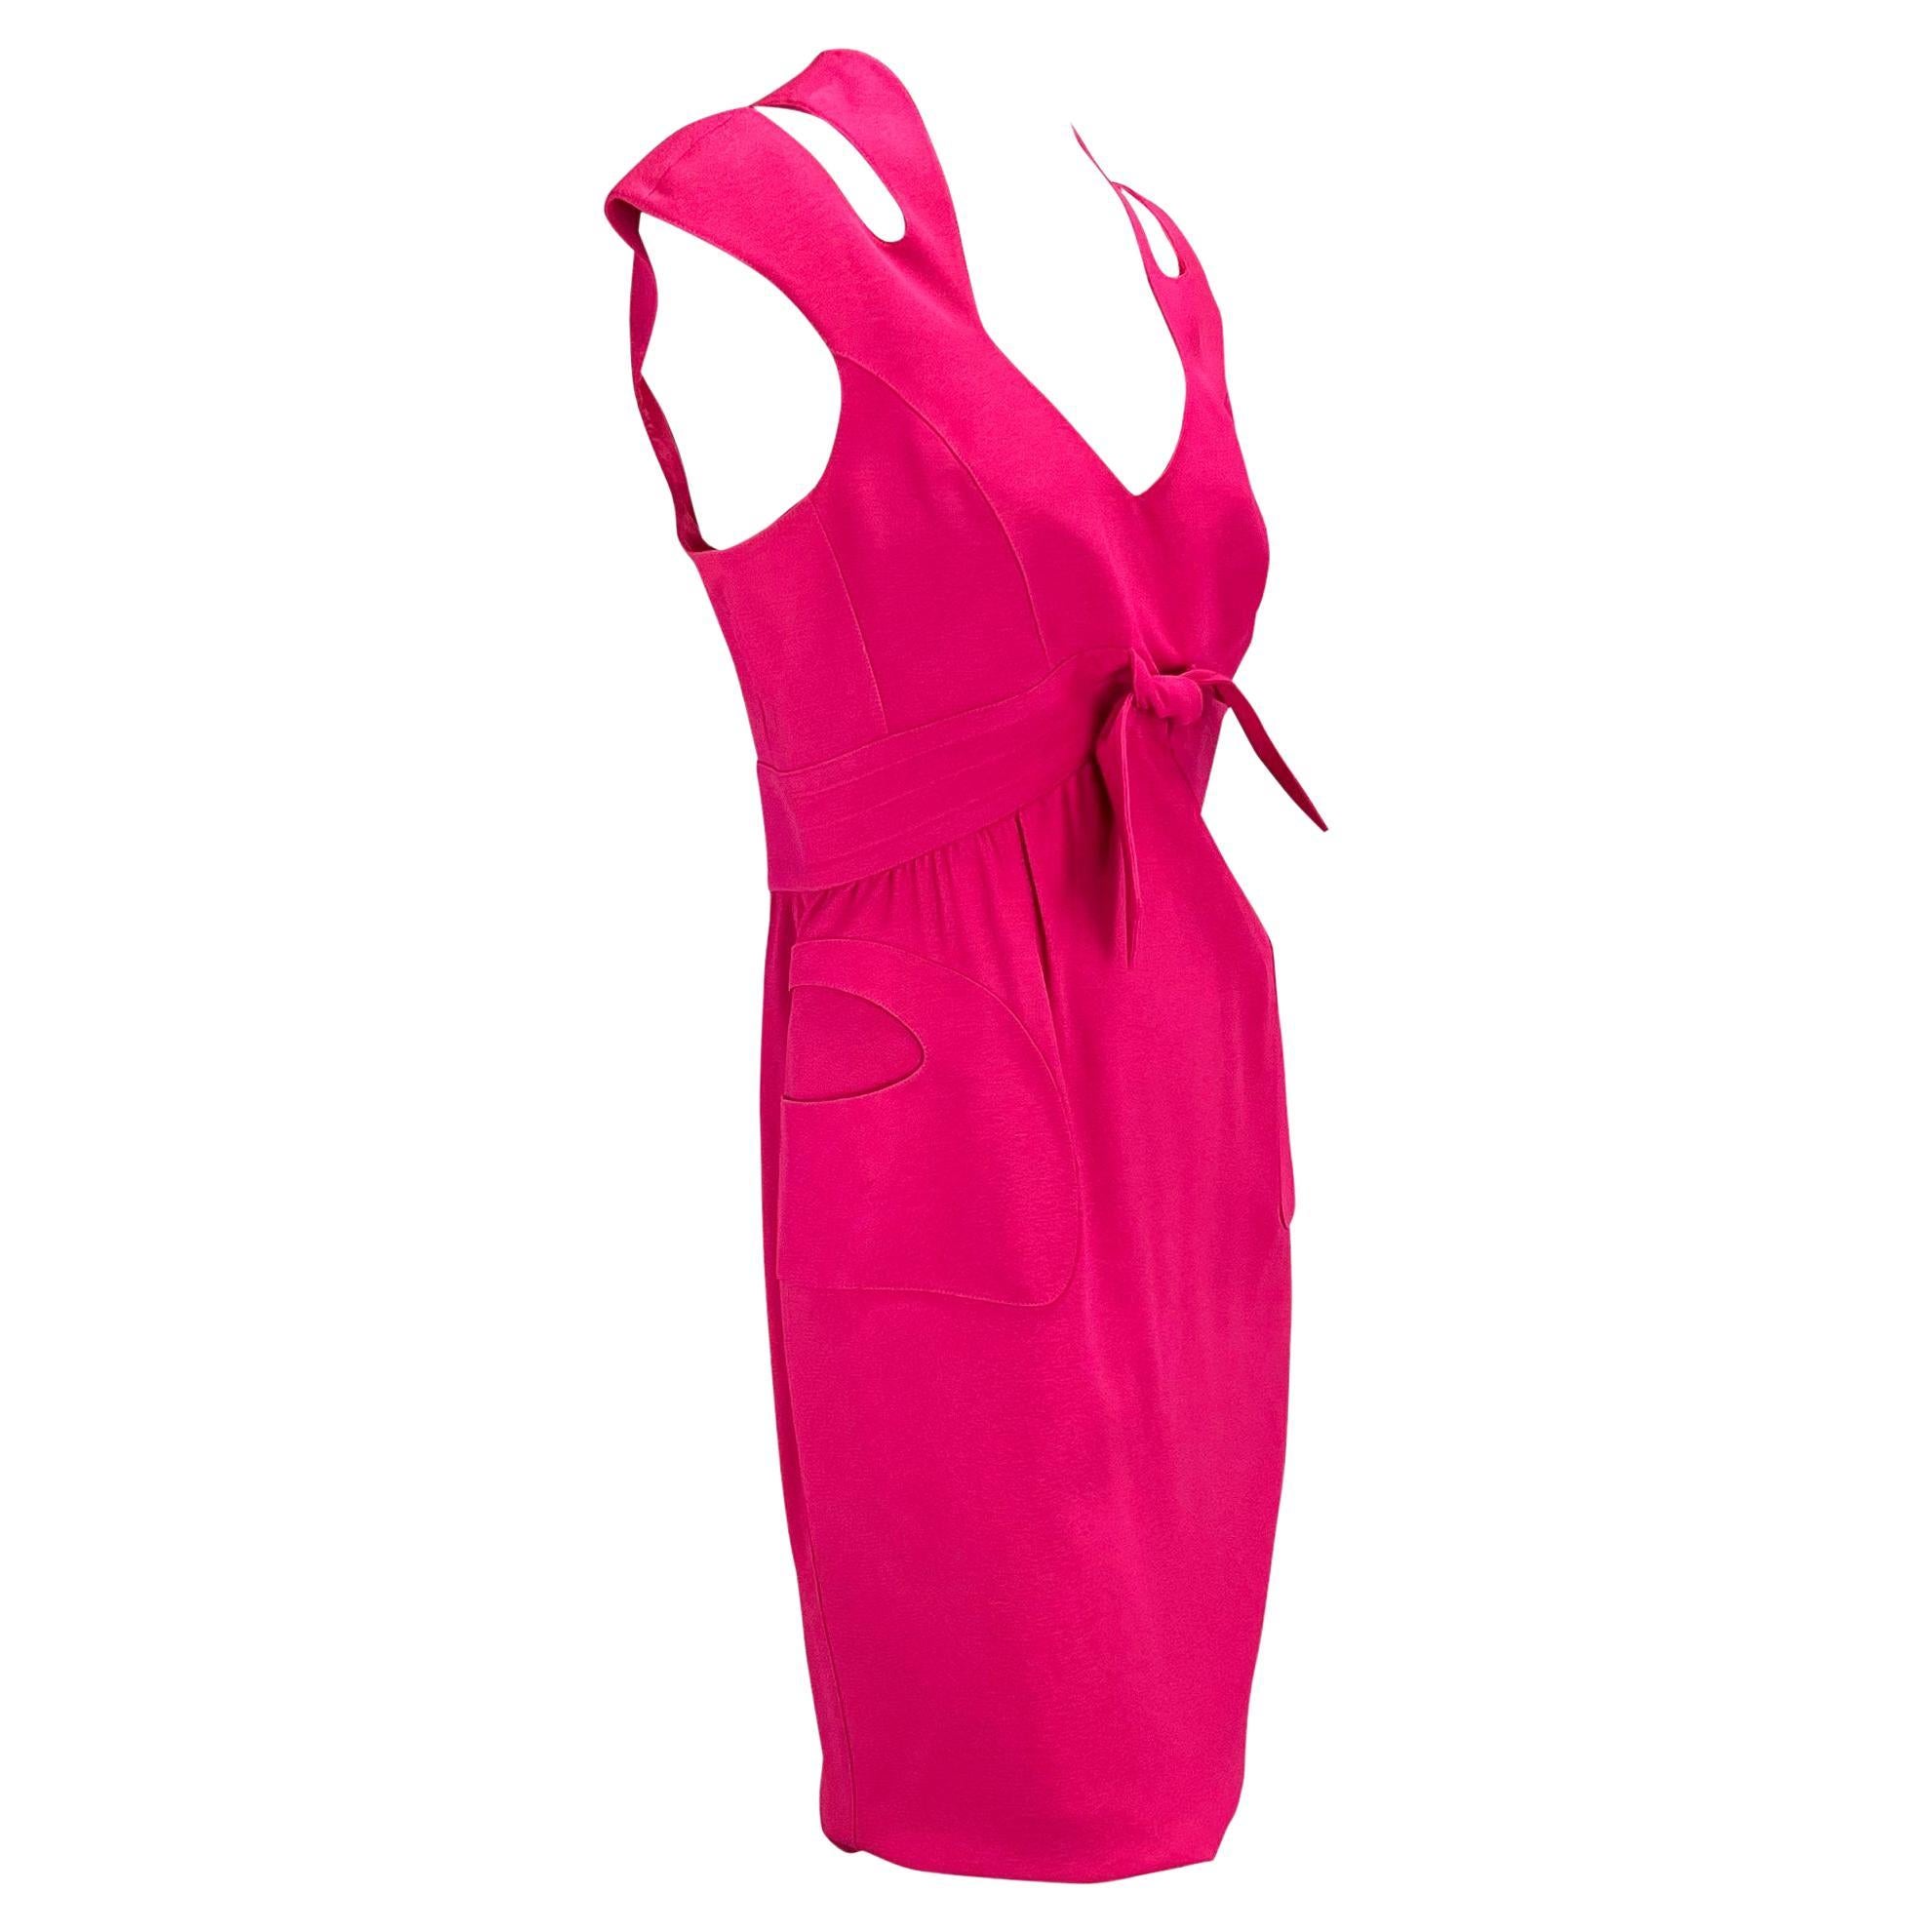 1980s Thierry Mugler Hot Pink Sleeveless Cut-Out Tie Sleeveless Dress In Good Condition For Sale In West Hollywood, CA